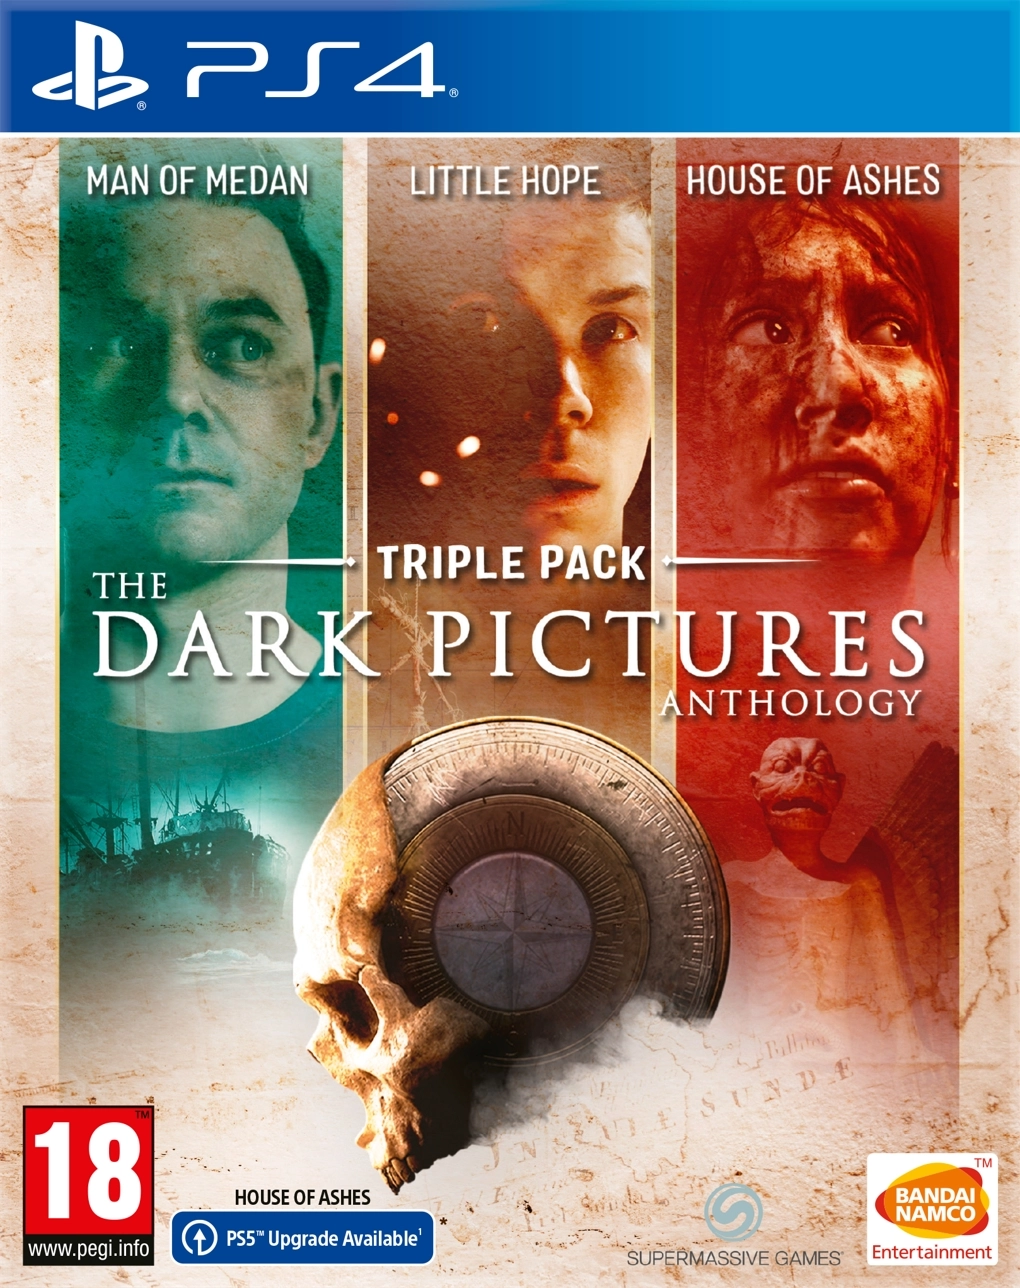 The Dark Pictures Anthology - Triple Pack (PS4), Supermassive Games